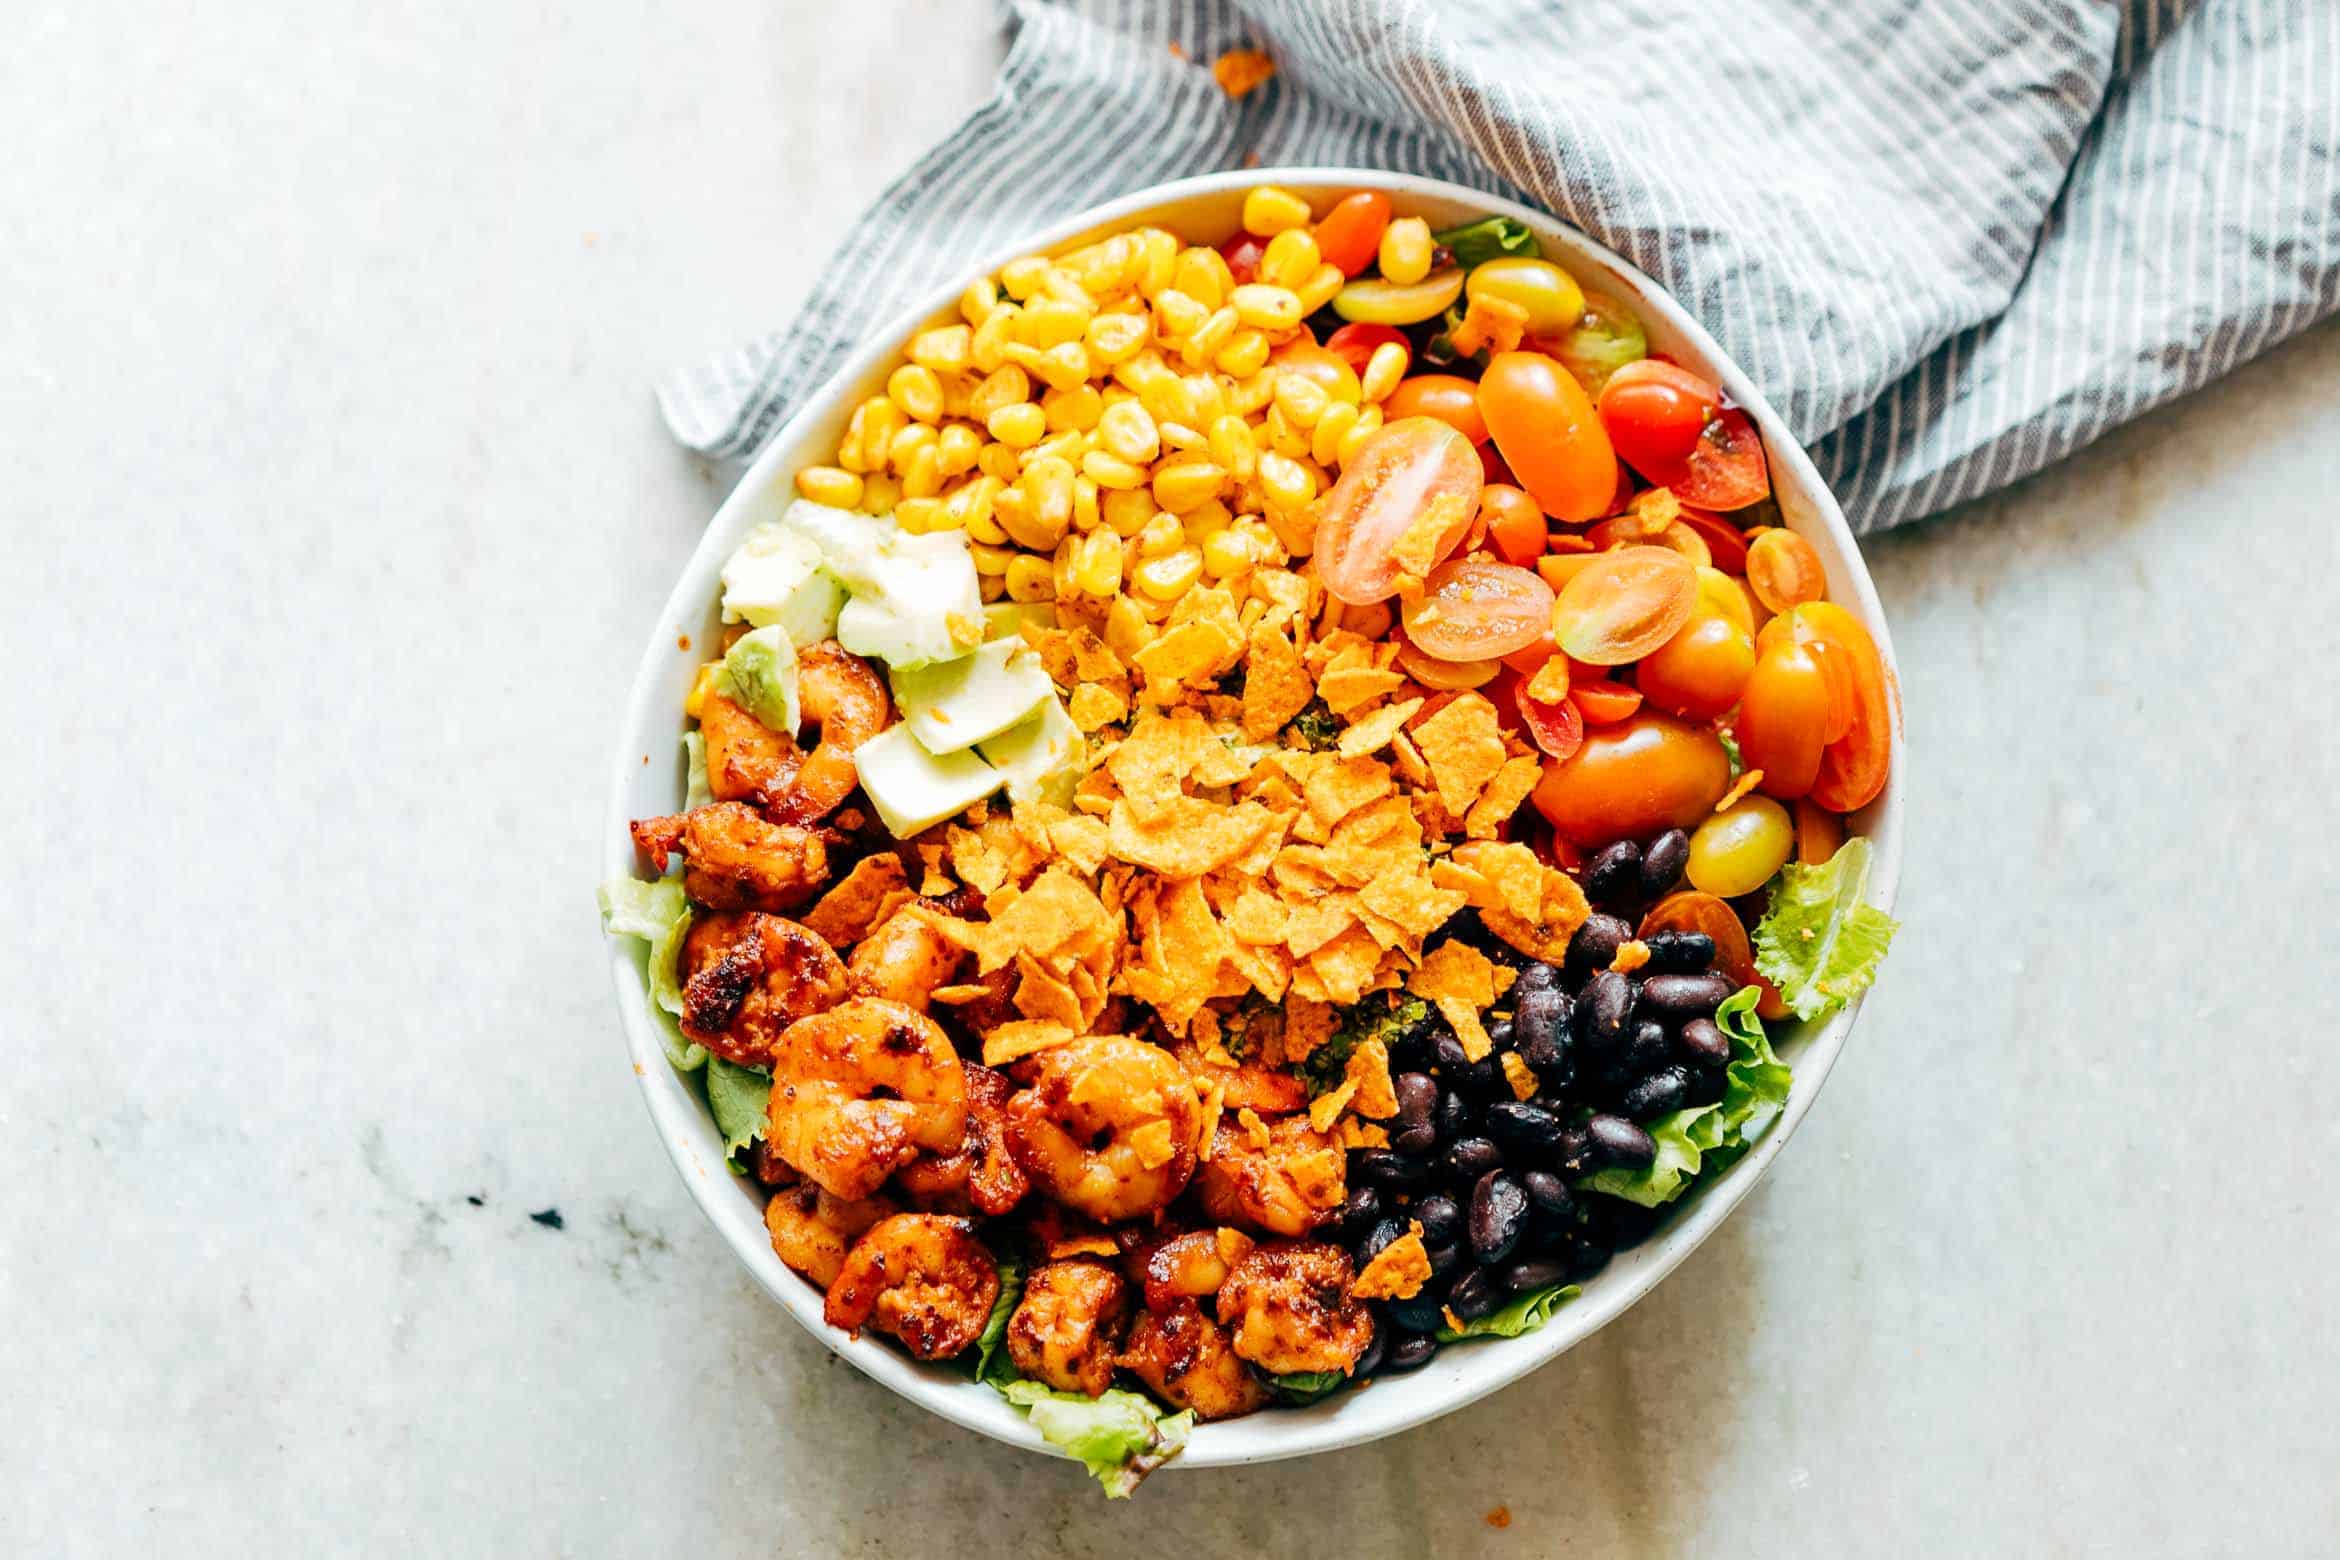 Mexican Prawn Avocado Taco Salad is a delicious, hearty salad that has all the flavours of your favourite mexican taco, but healthier. Loaded with lettuce, black beans, avocado, cherry tomatoes, corn and a delicious cilantro lime dressing, it's perfect when you want salad for dinner.